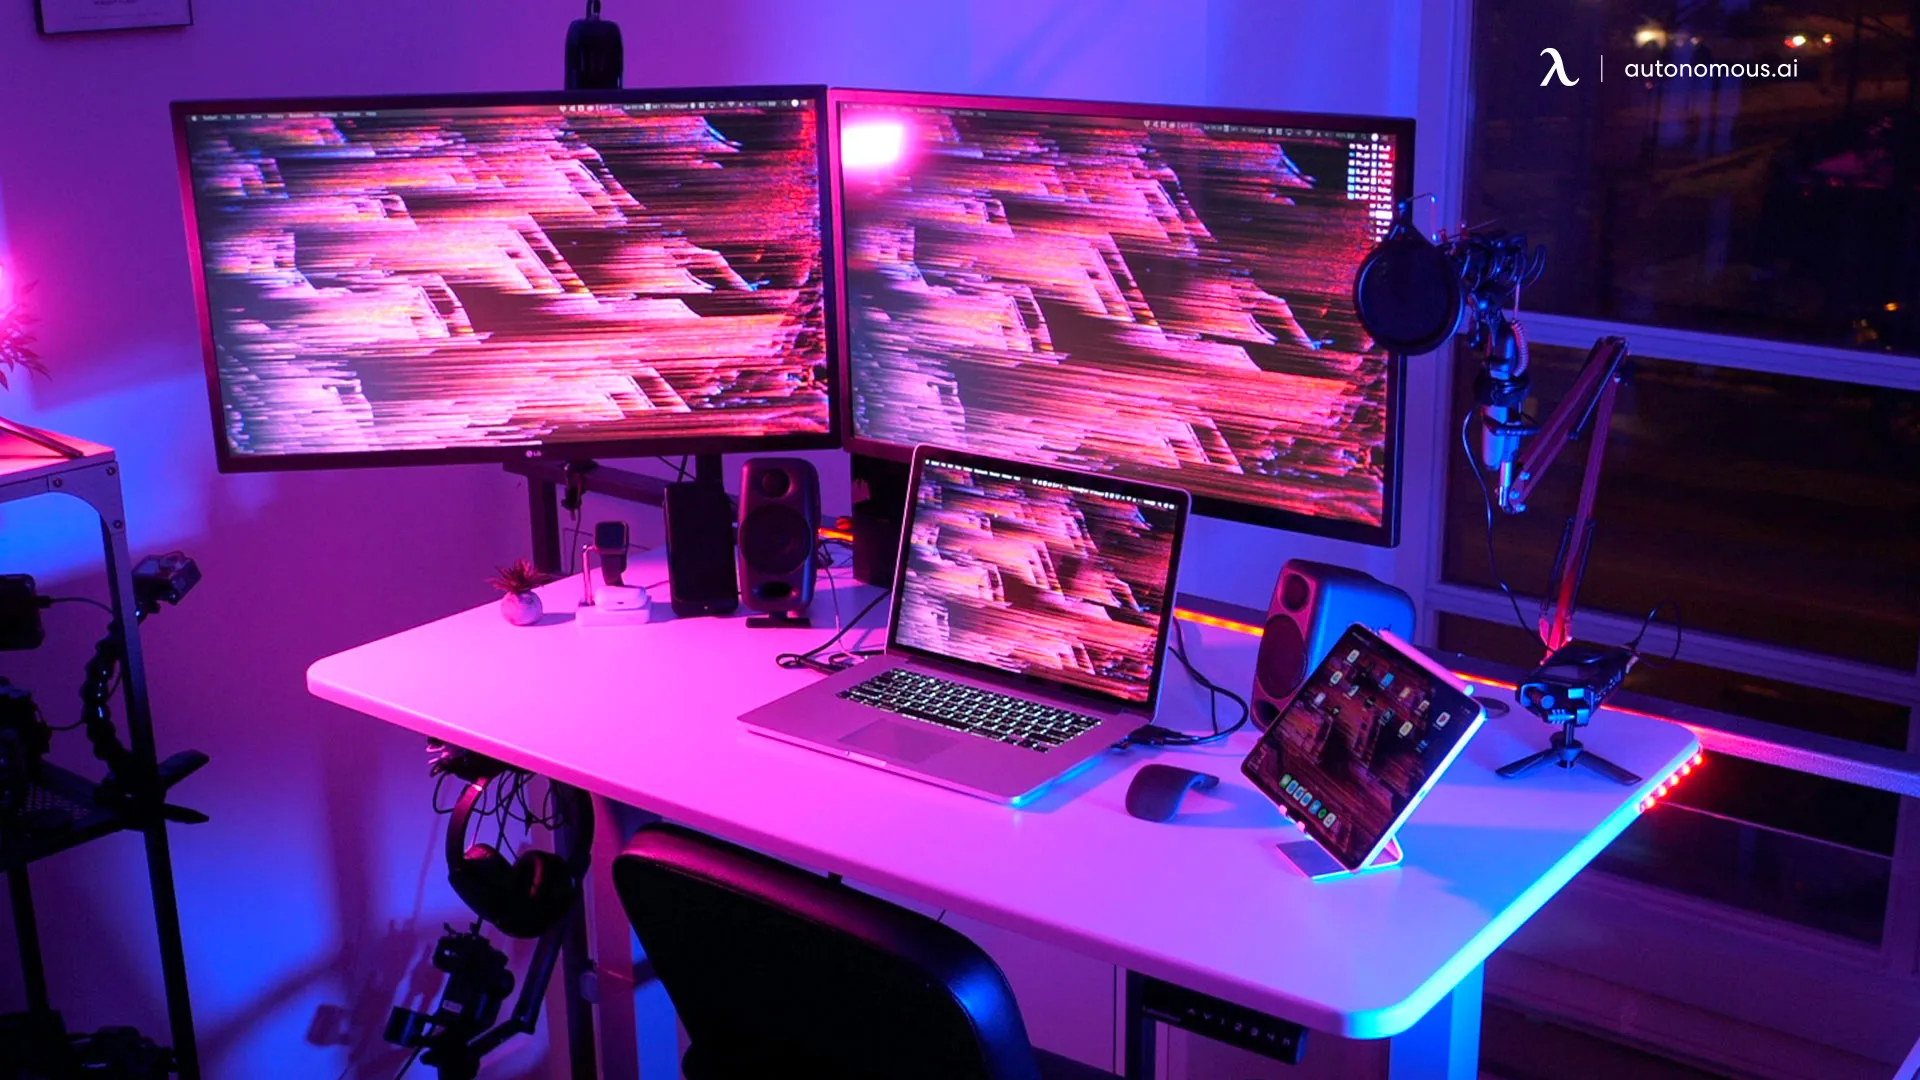 Premium AI Image  Gaming room setup ideas that will make your home look  cool gaming room setup